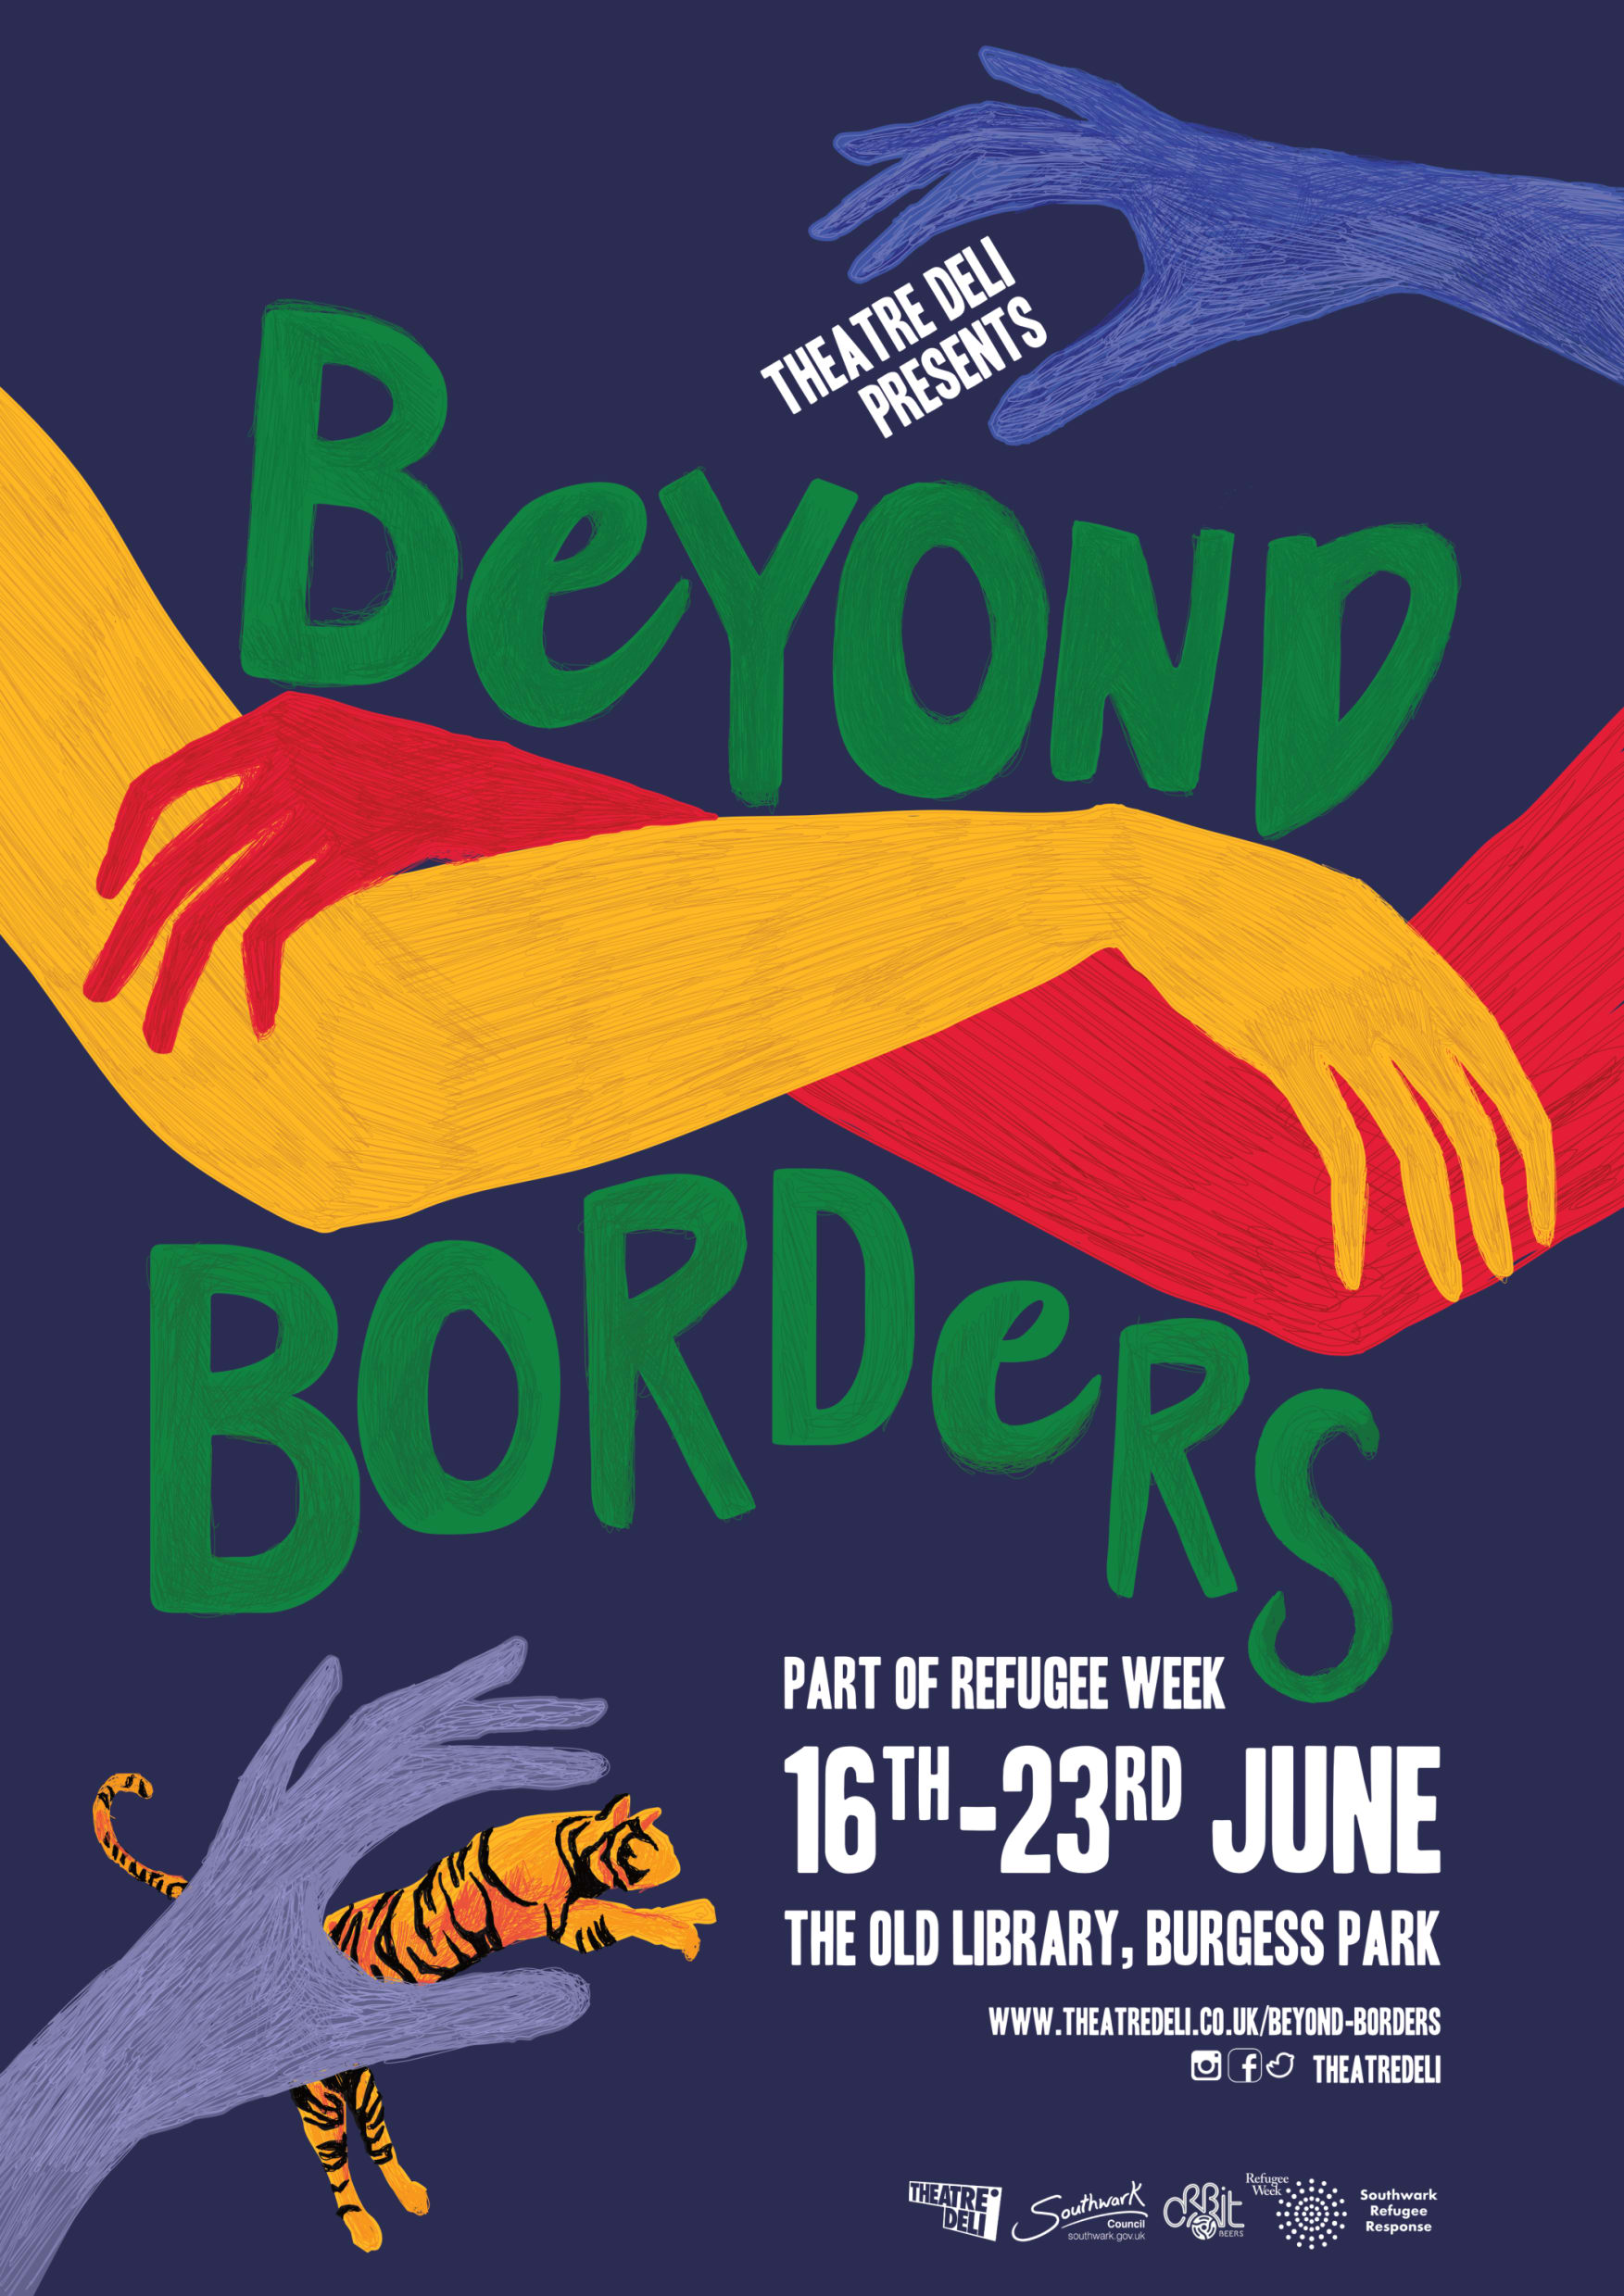 A colourful digital flyer with images of hands that says Theatre Deli presents Beyond Boarders, with venue and dates information